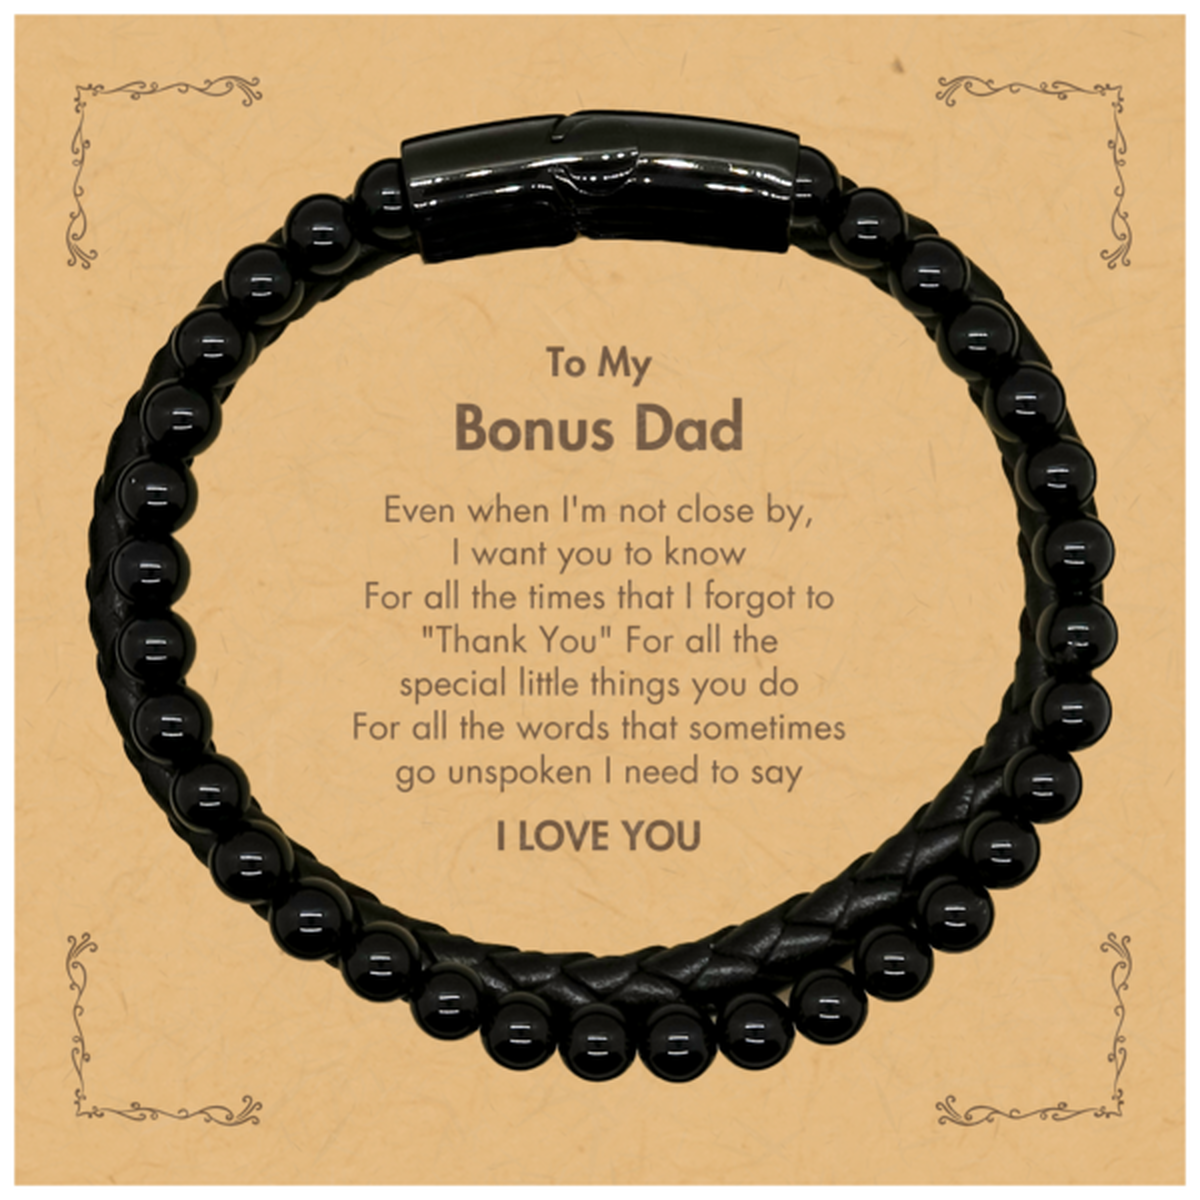 Thank You Gifts for Bonus Dad, Keepsake Stone Leather Bracelets Gifts for Bonus Dad Birthday Mother's day Father's Day Bonus Dad For all the words That sometimes go unspoken I need to say I LOVE YOU